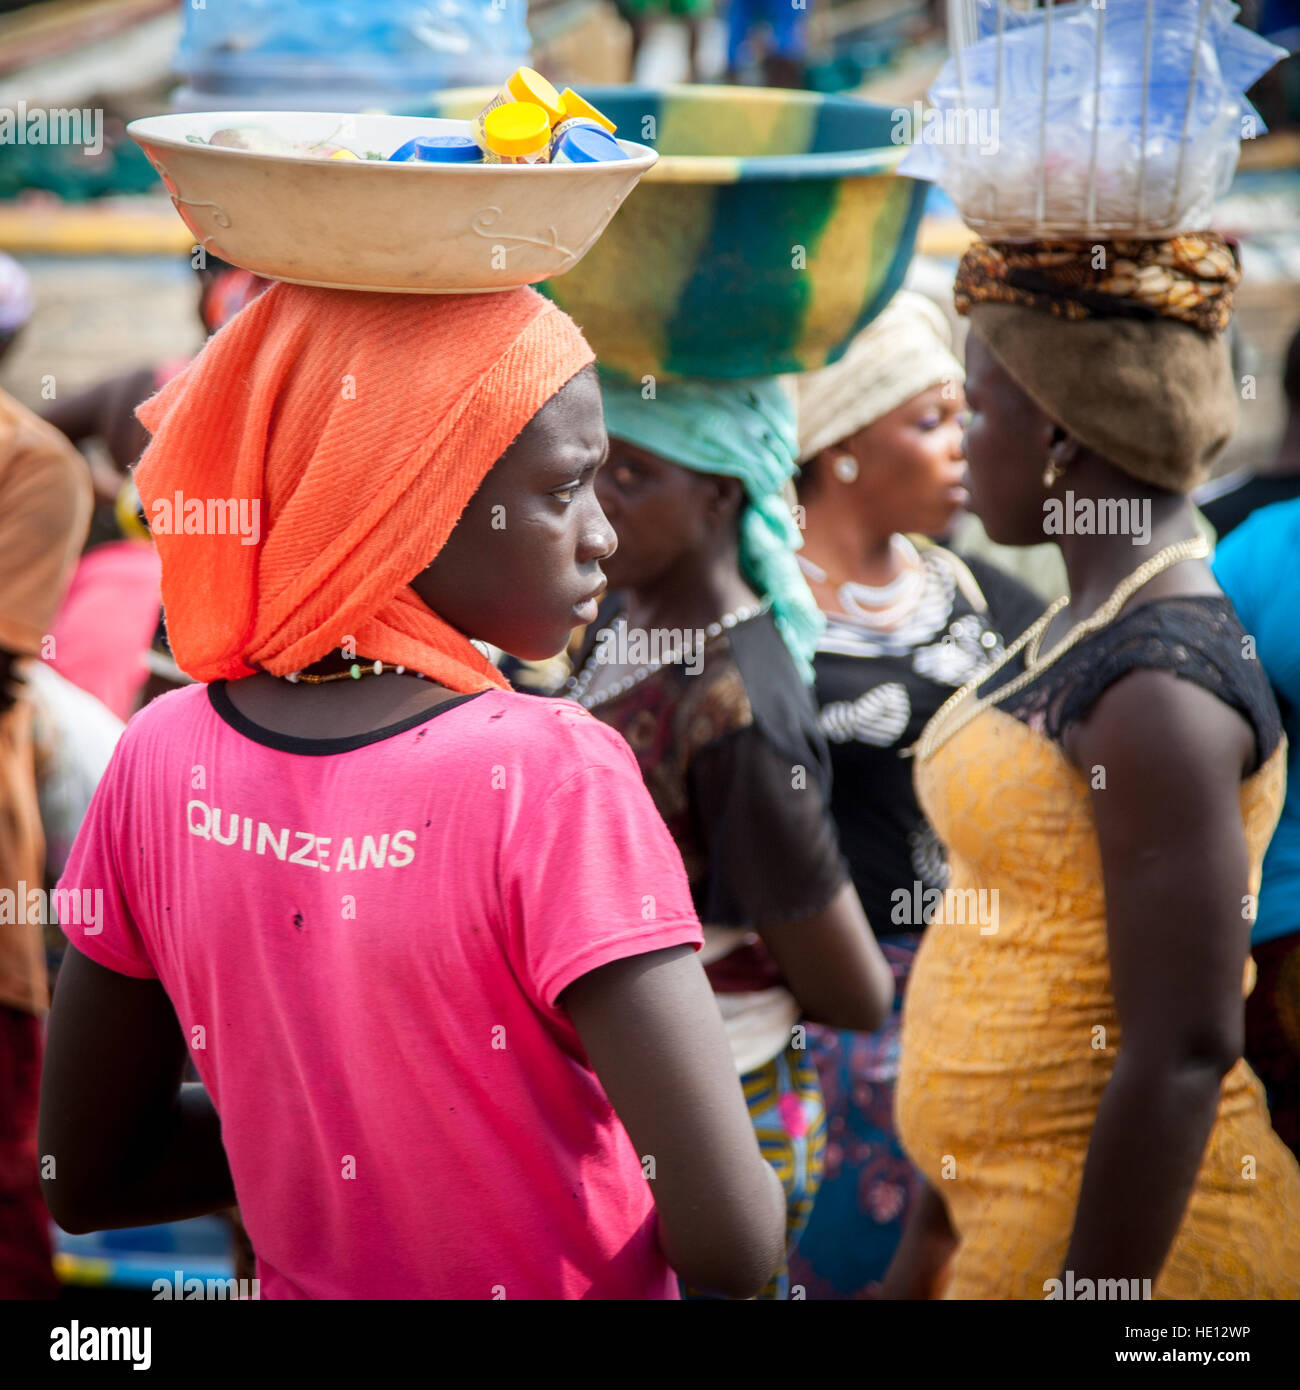 Women in Tombo, Sierra Leone, carrying bowls and trays on head Stock Photo